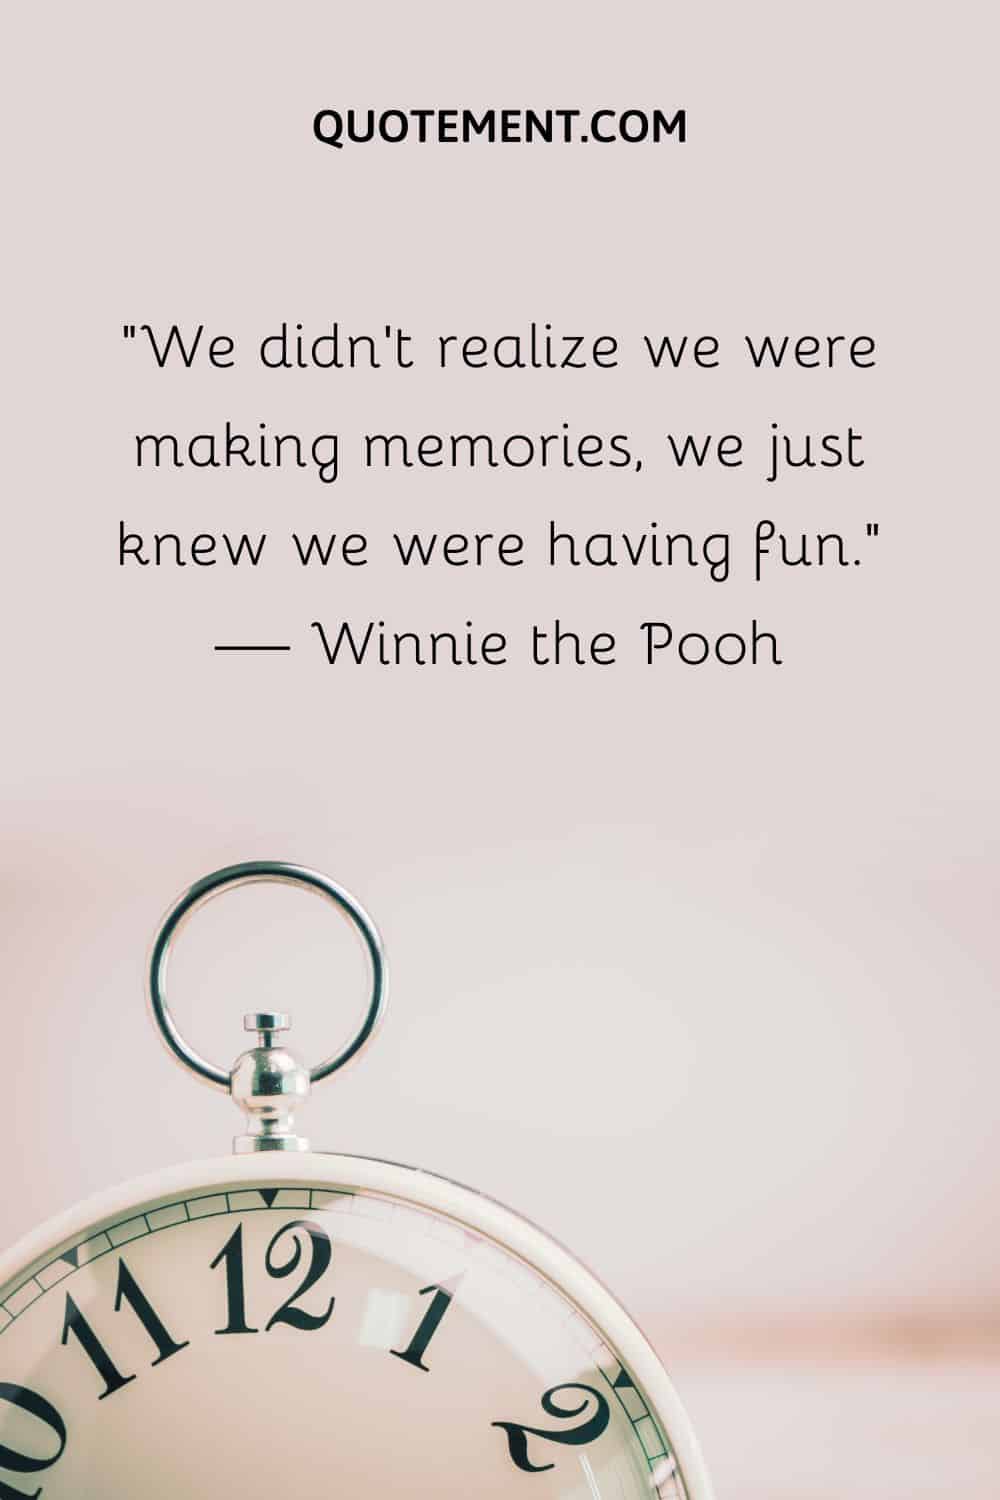 We didn't realize we were making memories